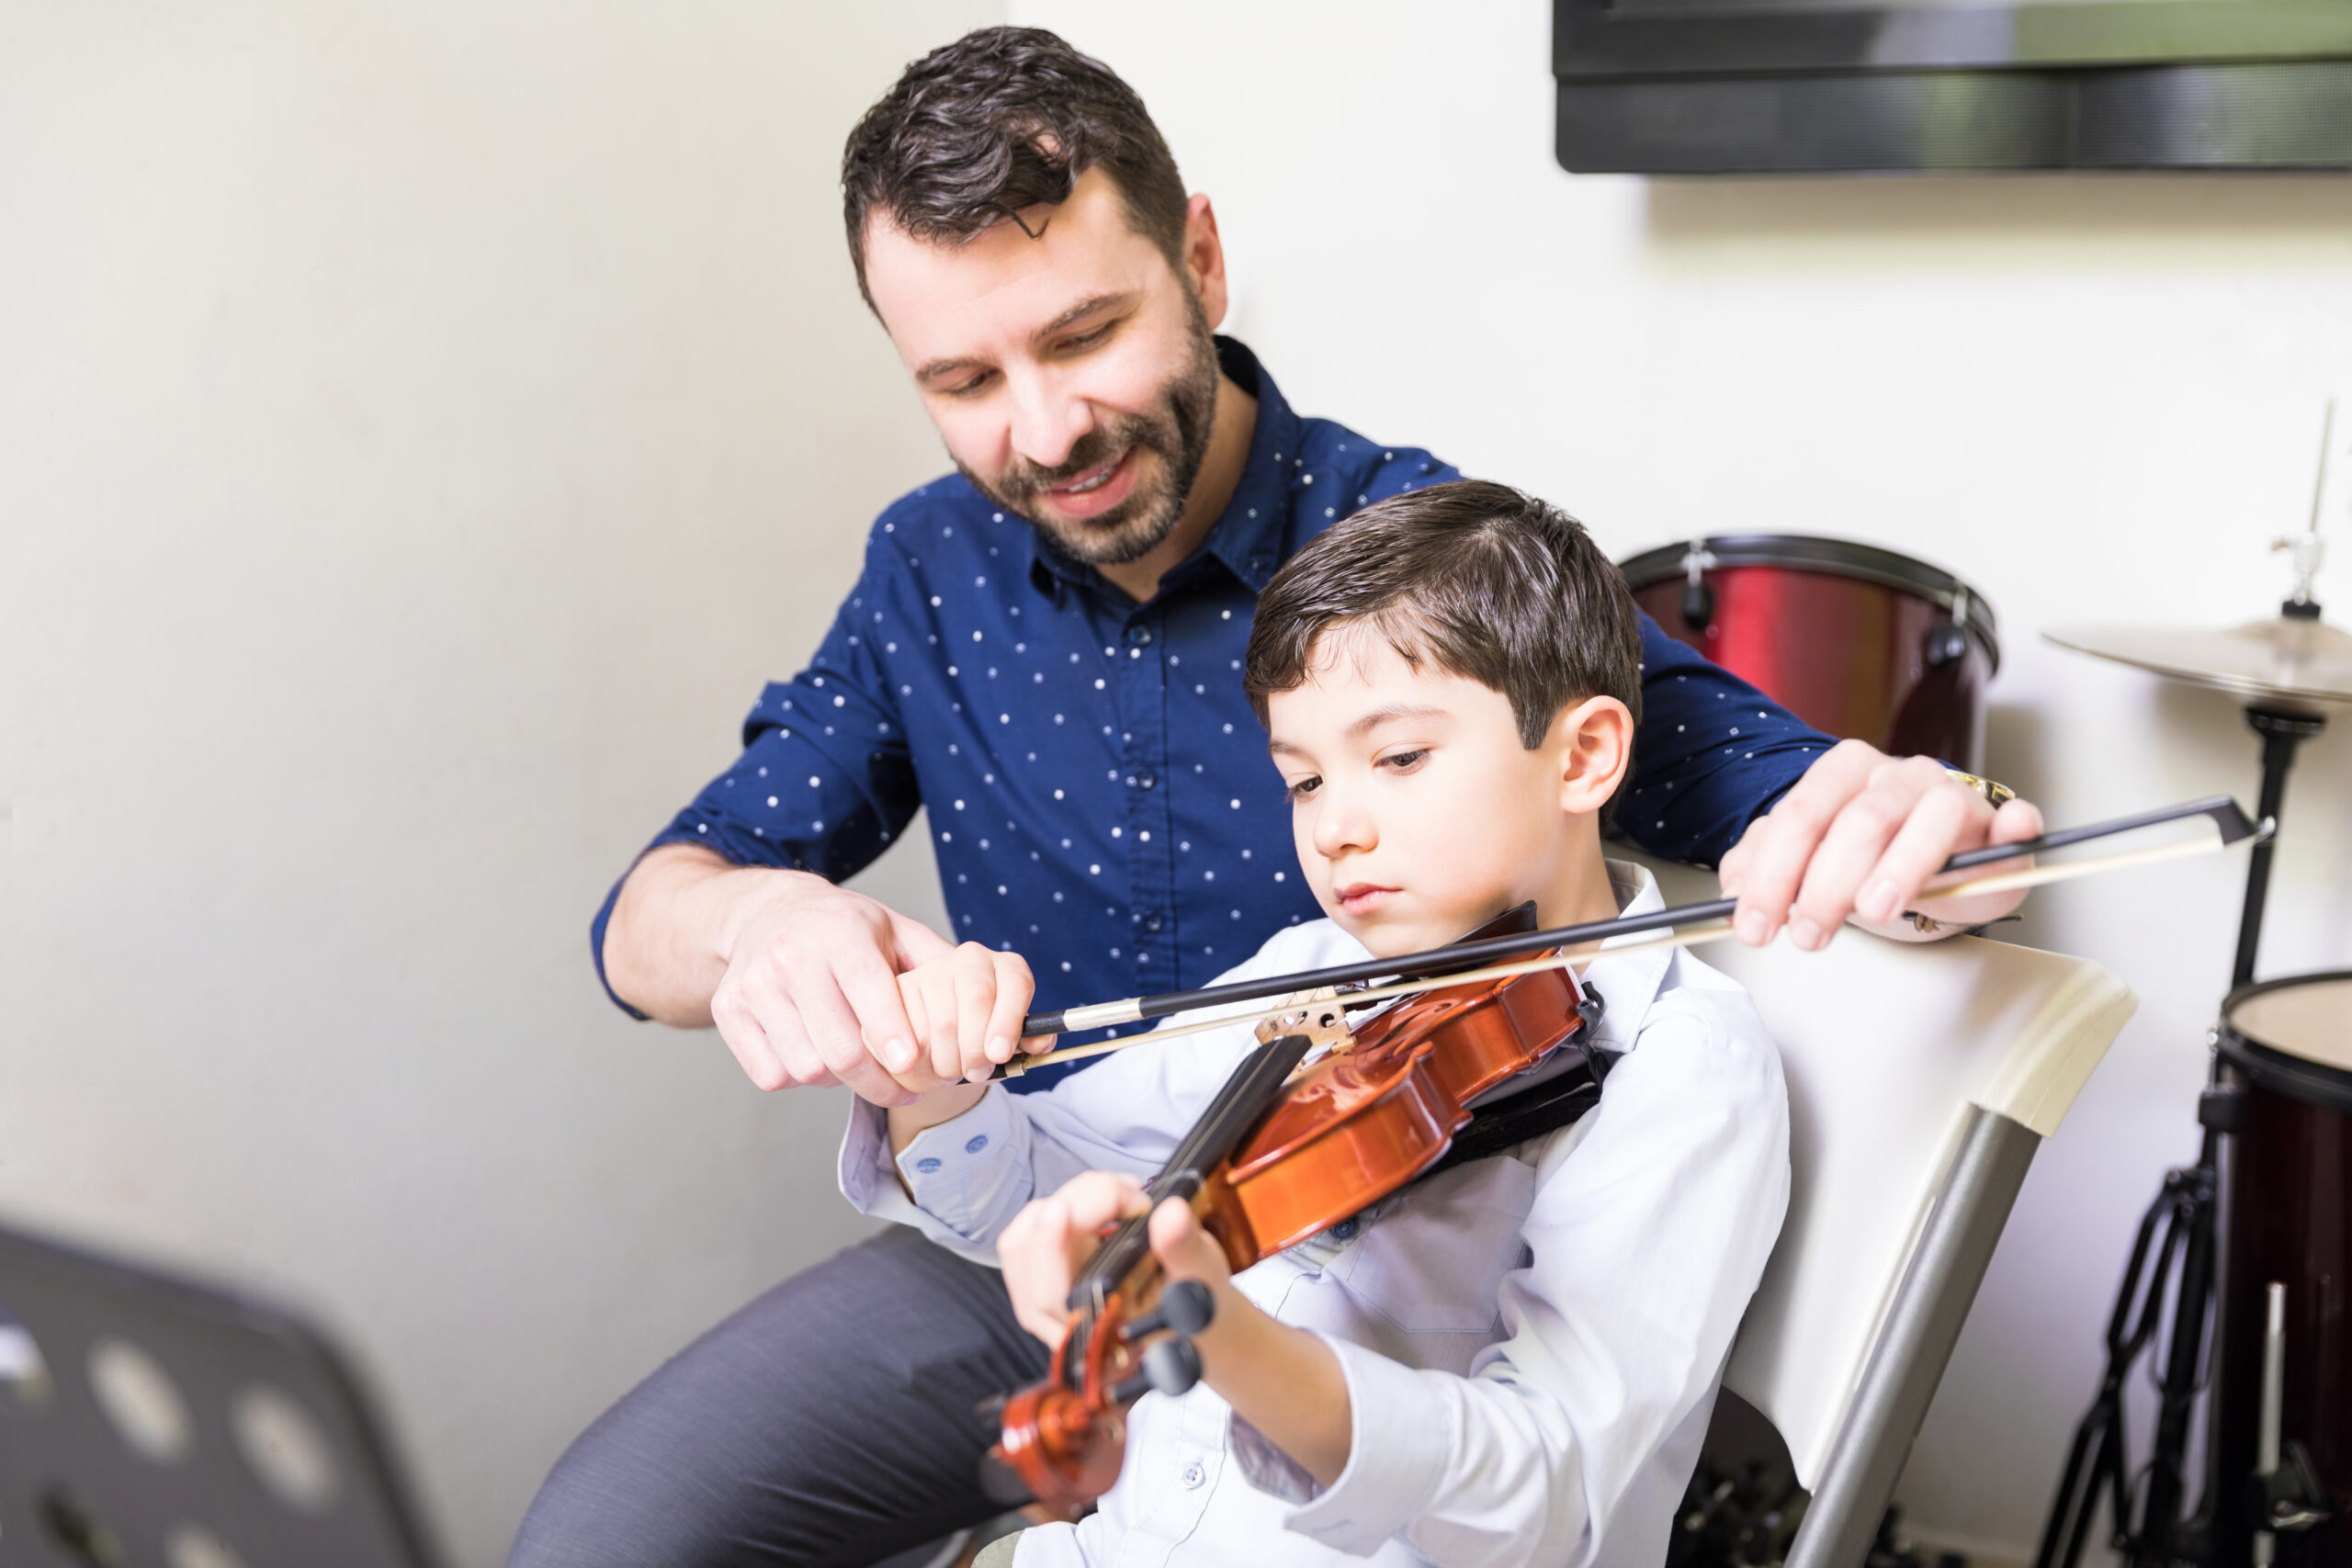 Prepare for Music Lessons by Teaching Music Fundamentals at Home